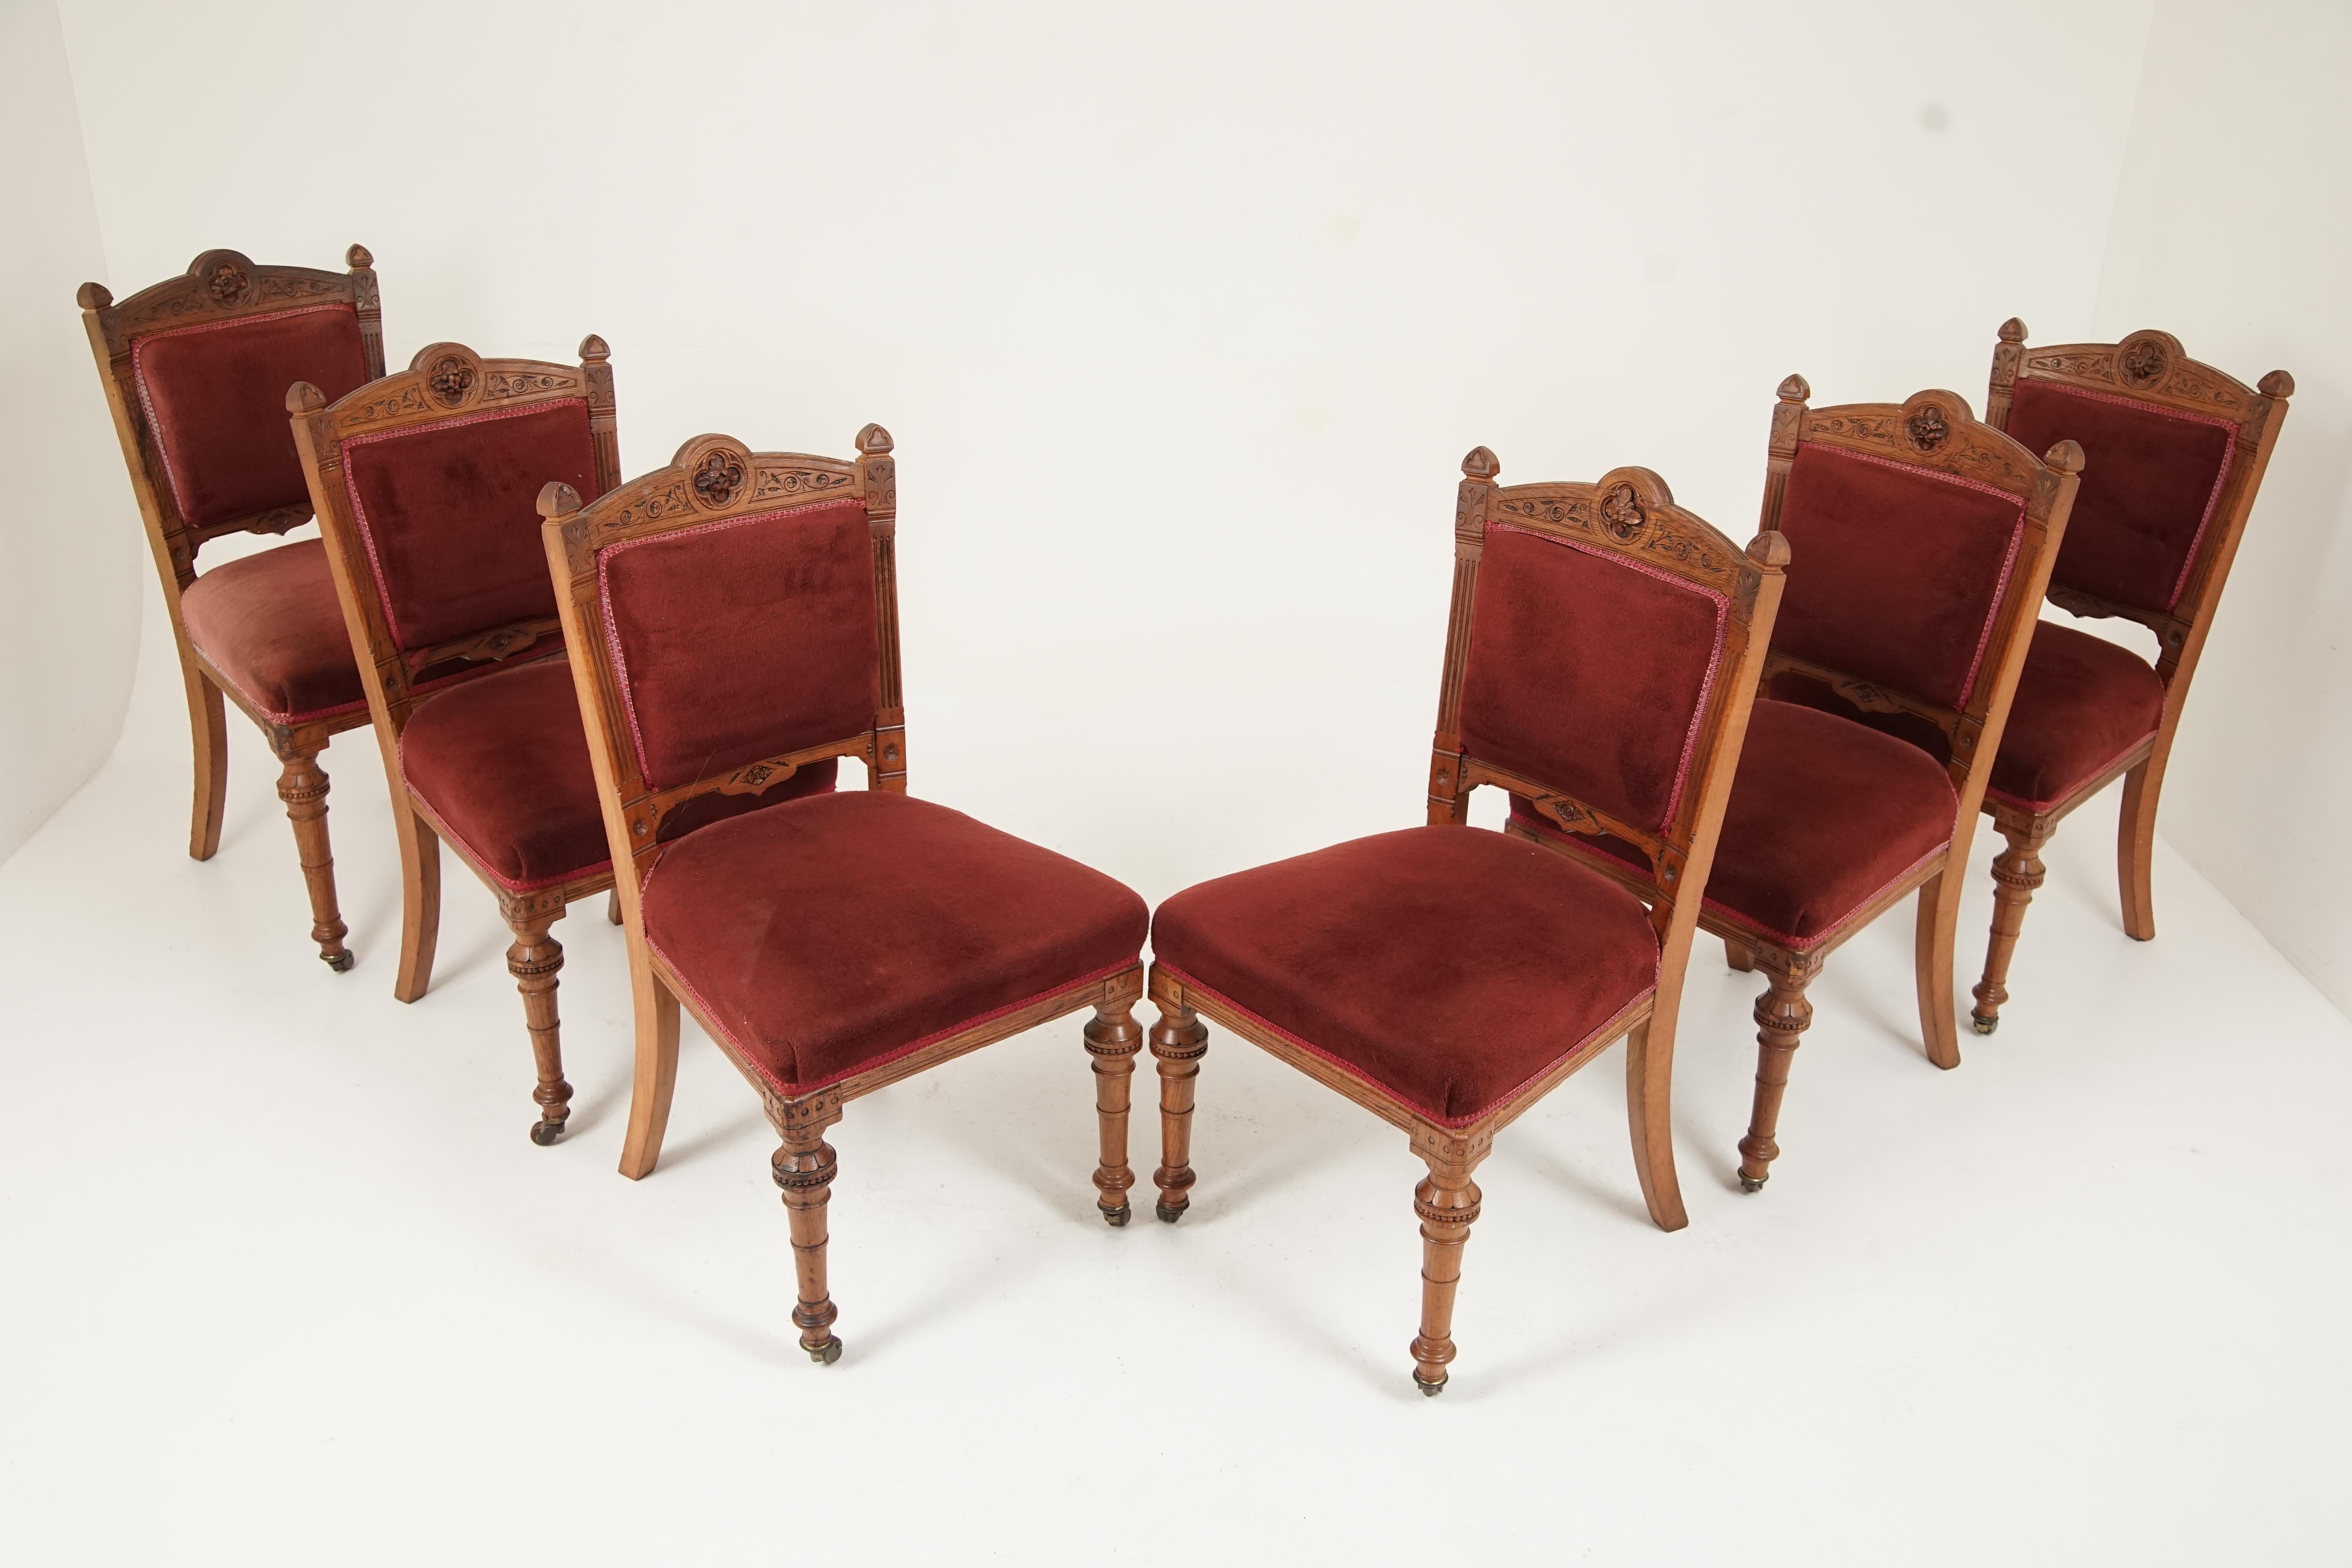 Hand-Crafted Set of 6 Victorian Oak Carved Upholstered Dining Chairs, Scotland 1890, B2451